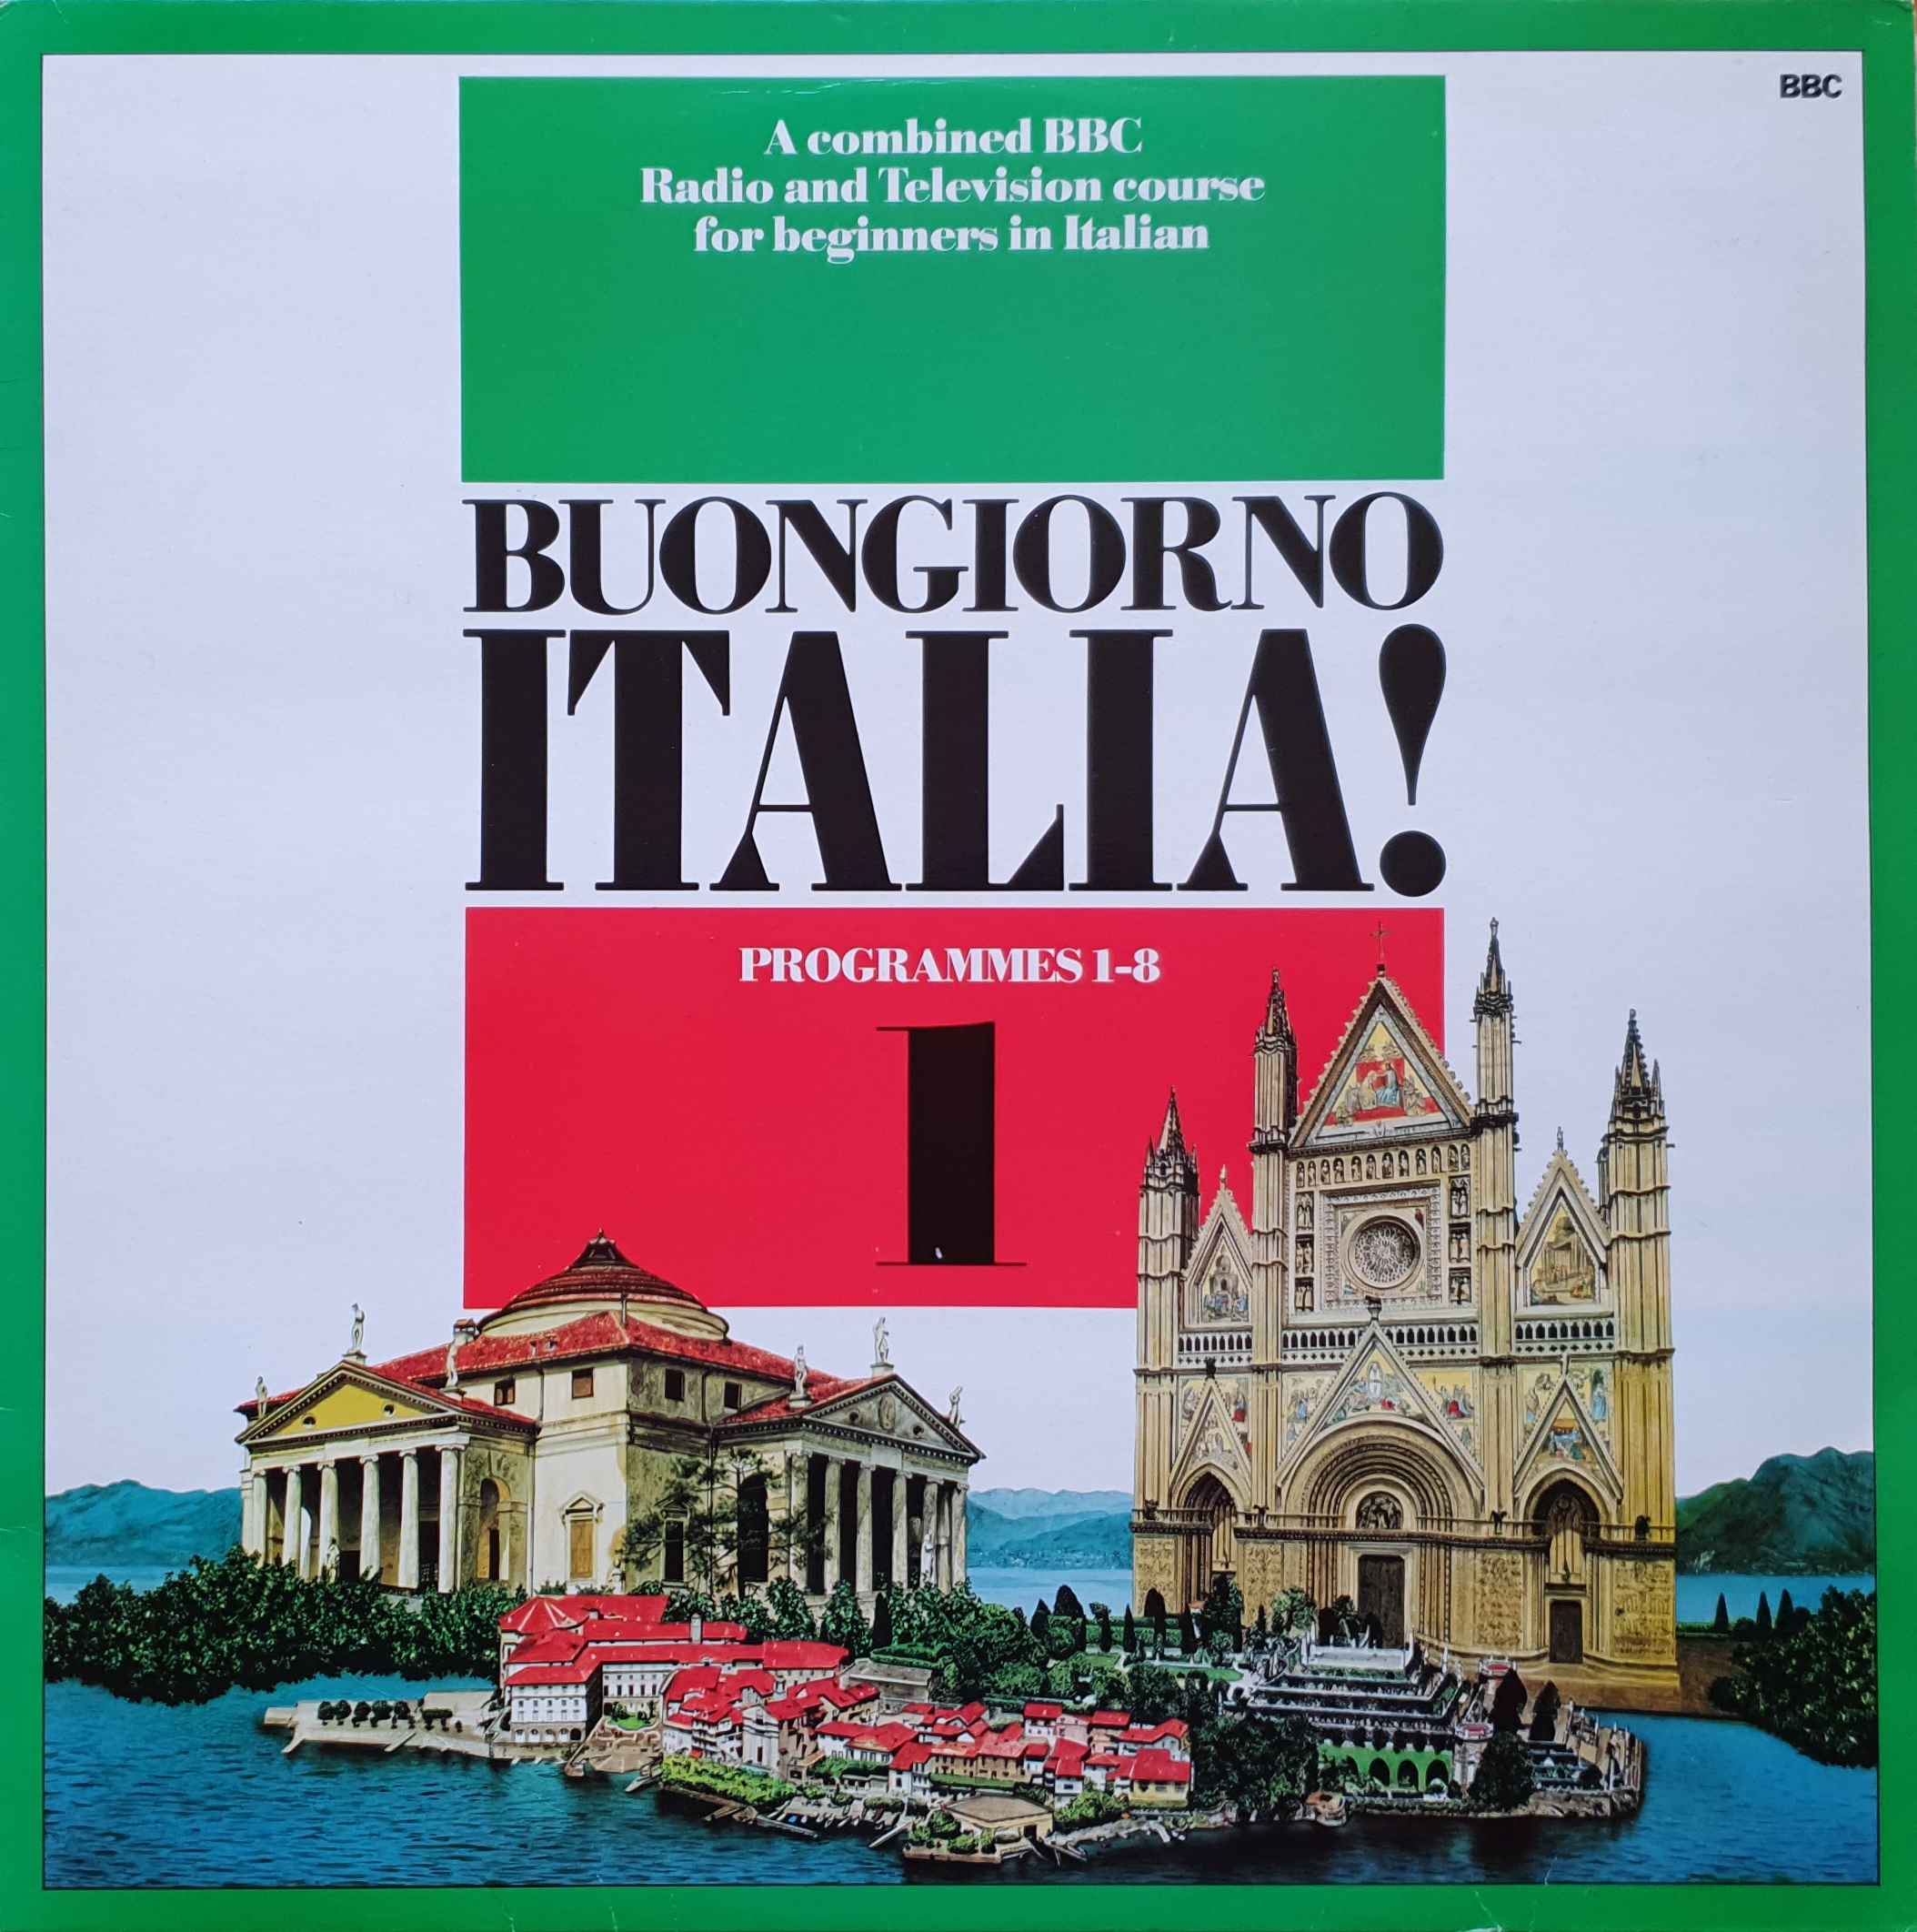 Picture of OP 260 Buongiorno Italia - 1-8 by artist Maddalena Fagandini / Antonietta Terry / Alan Wilding from the BBC albums - Records and Tapes library